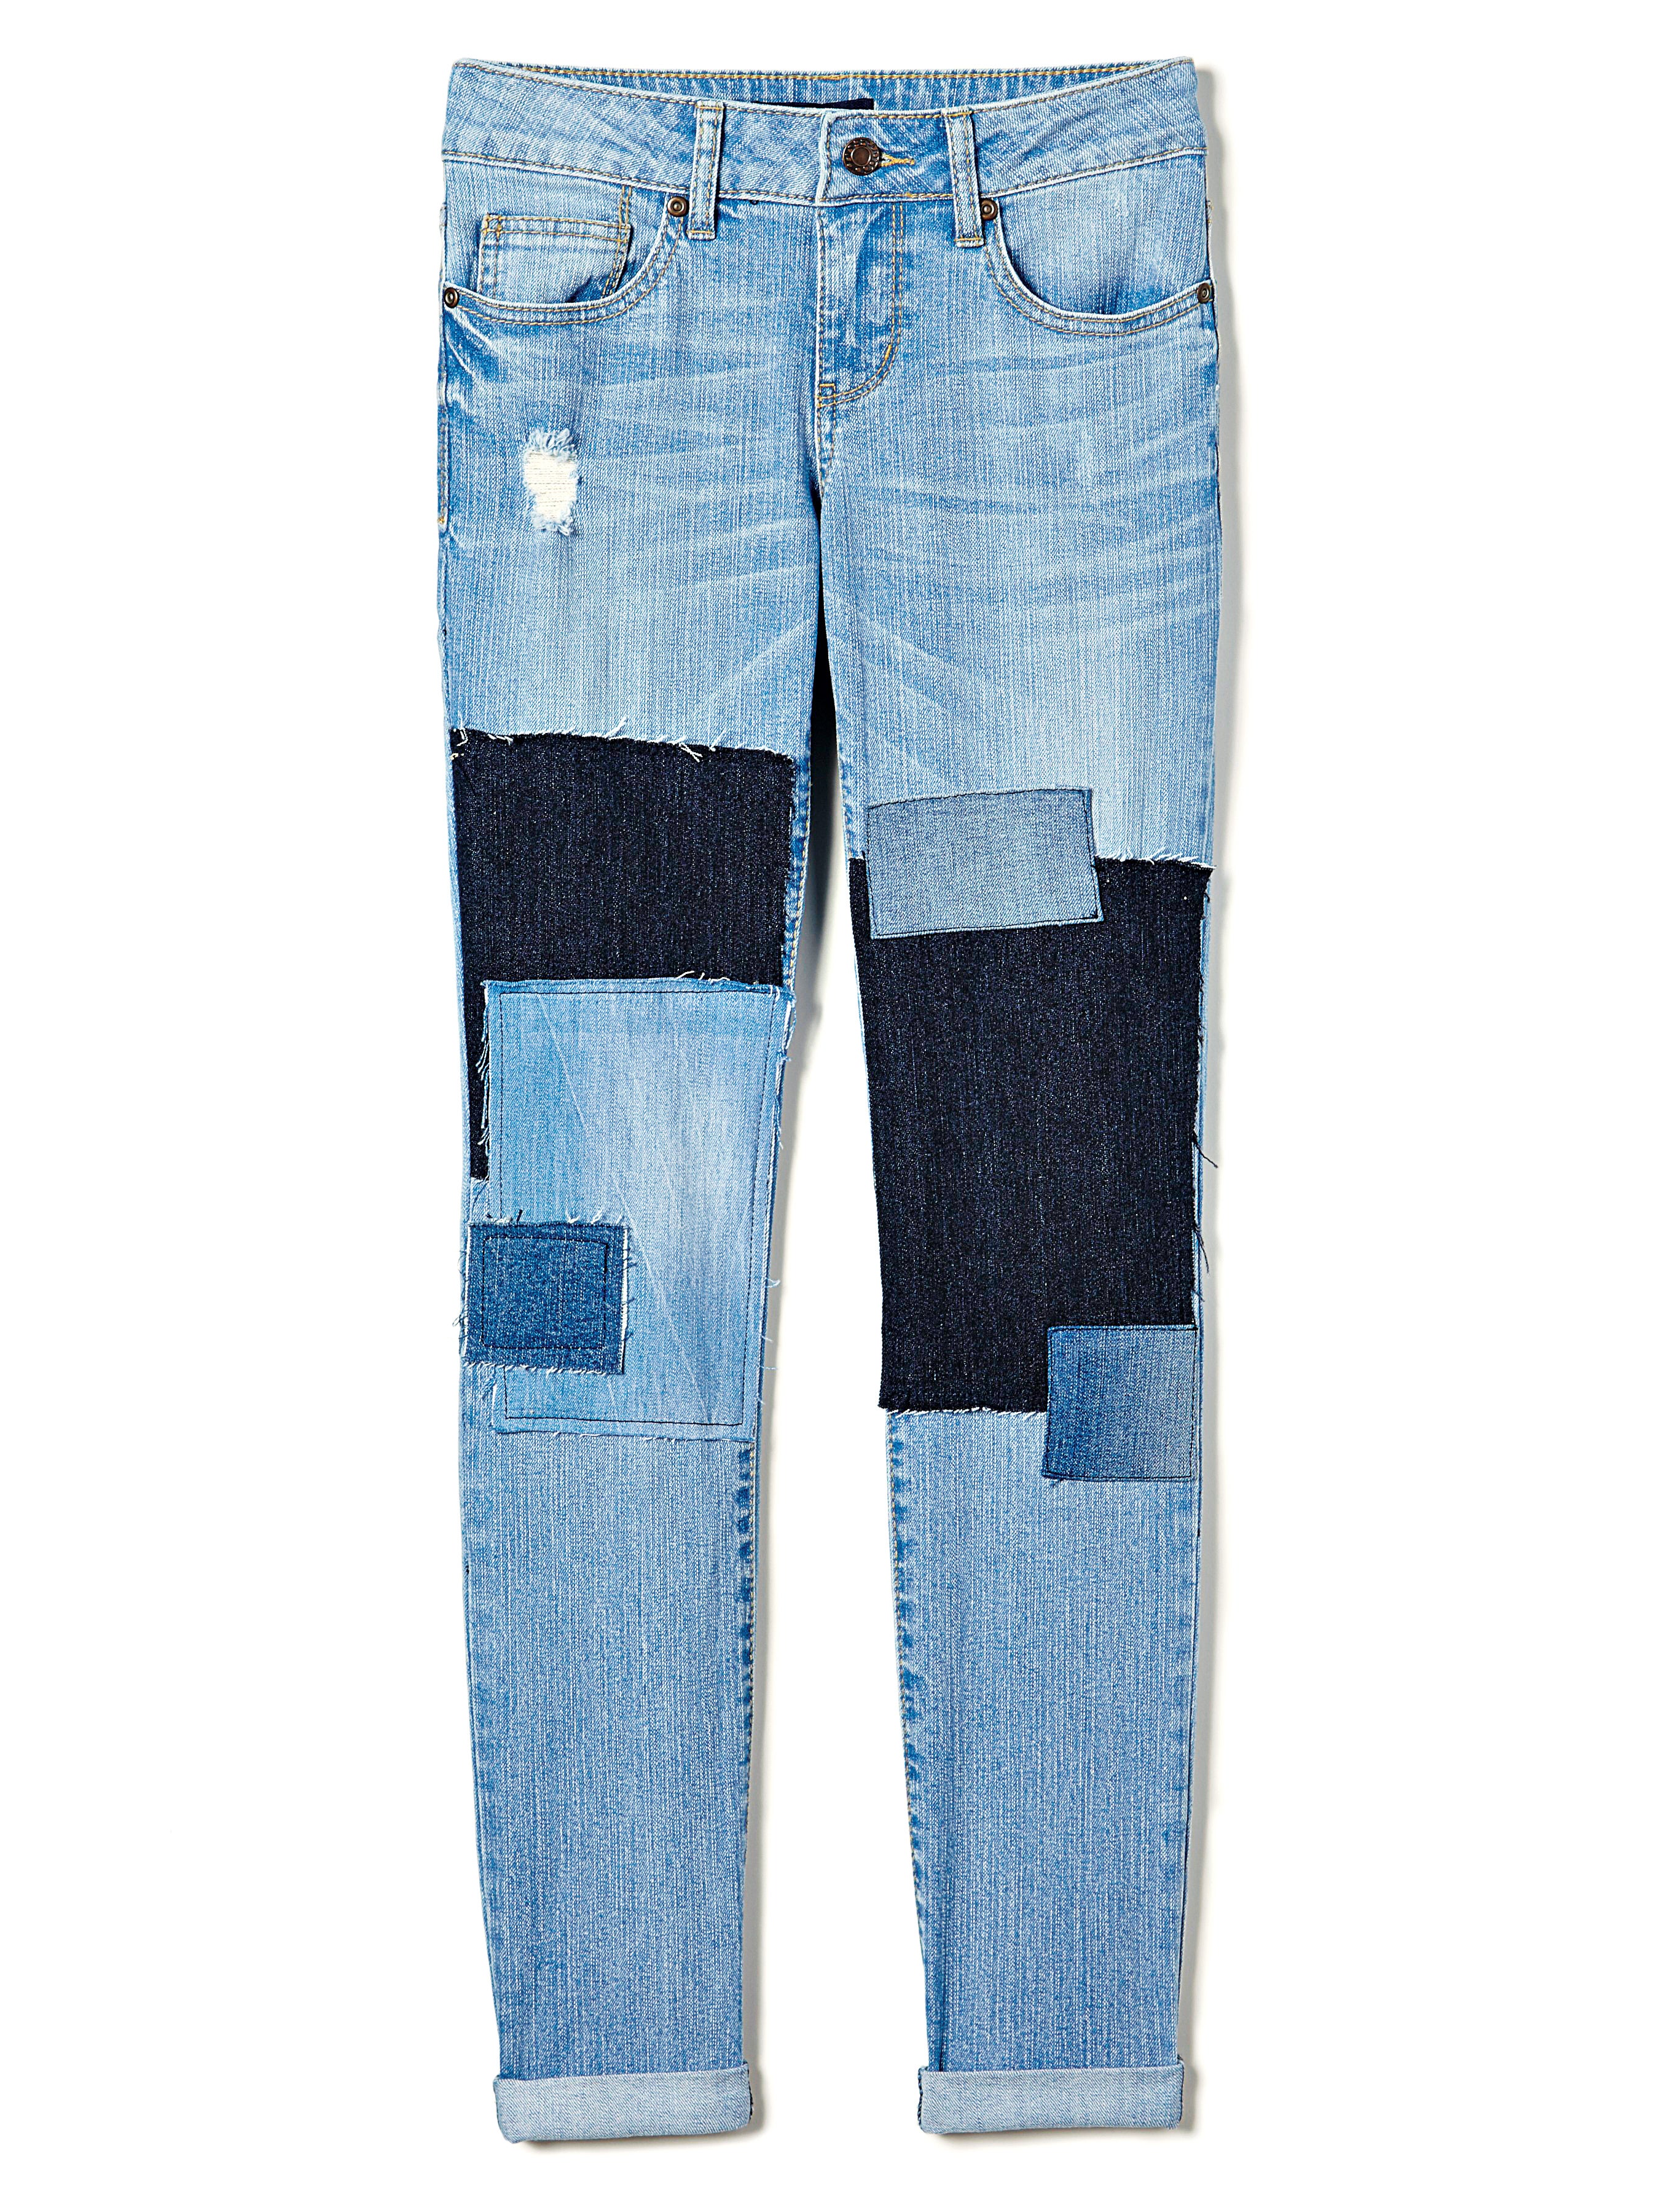 All About The Blues: ESSENCE's Denim Guide | Essence